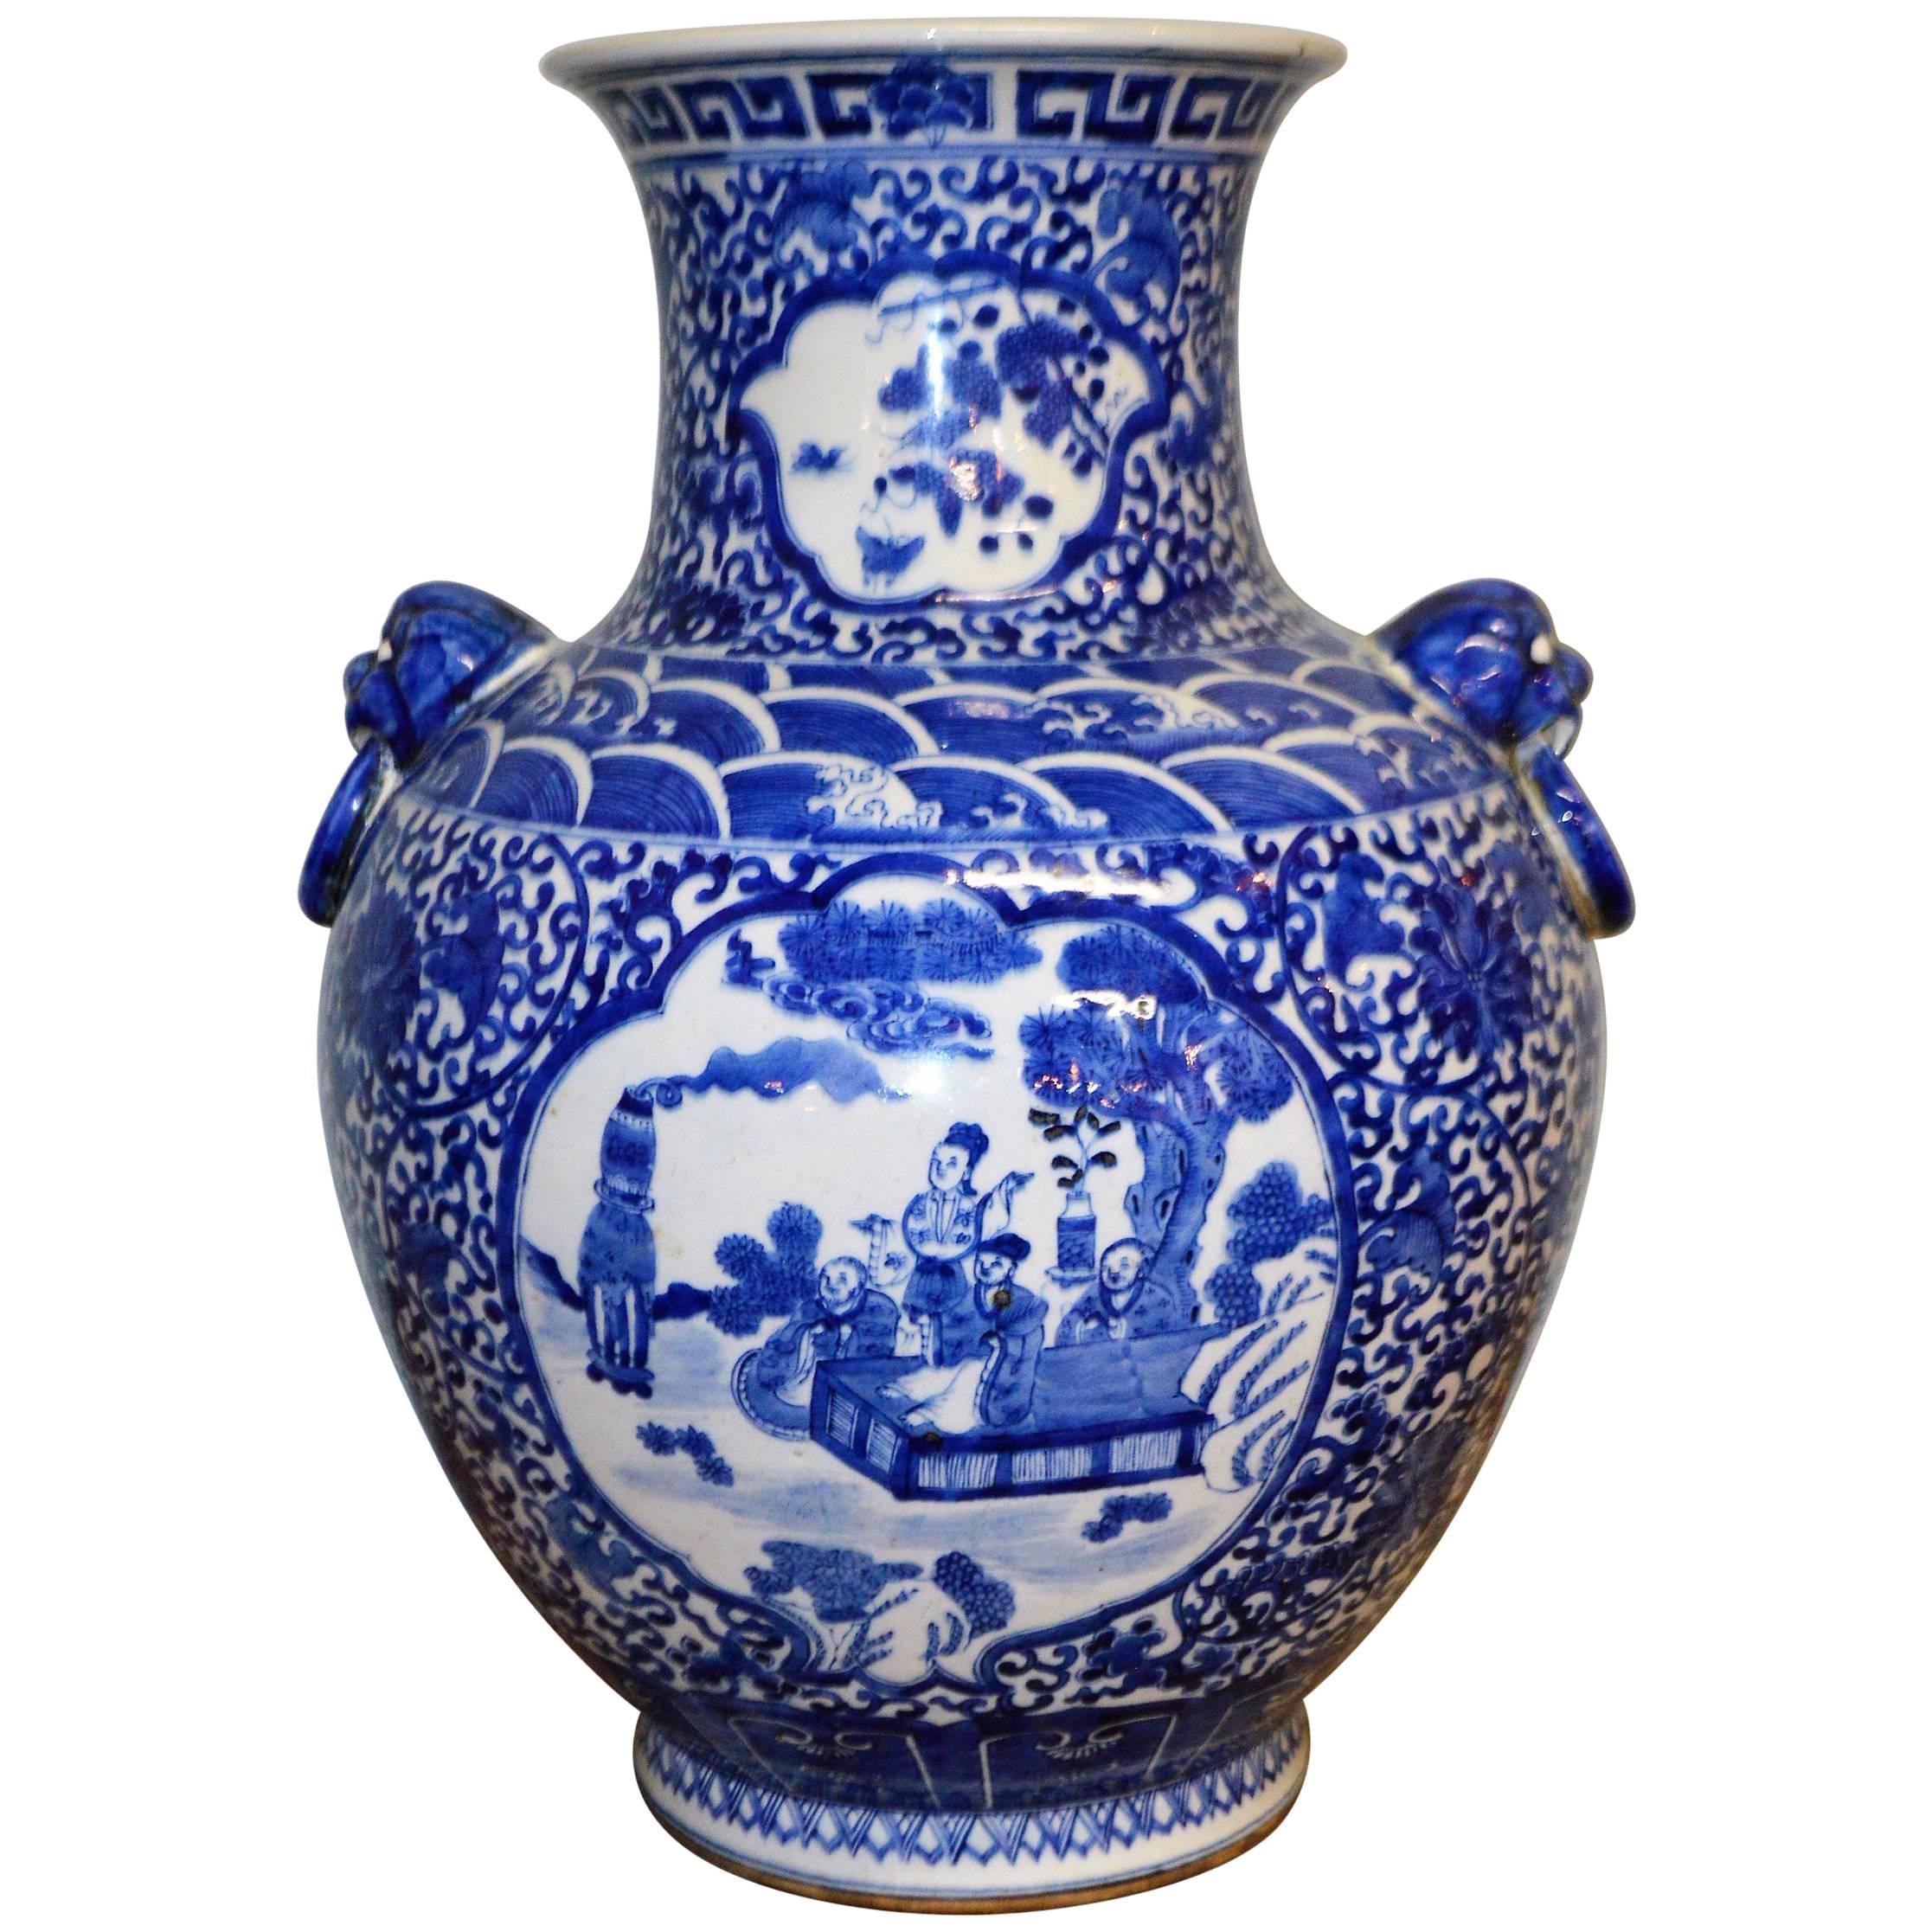 Large Blue & White Chinese Porcelain Vase with Figural Subjects and Foo Handles